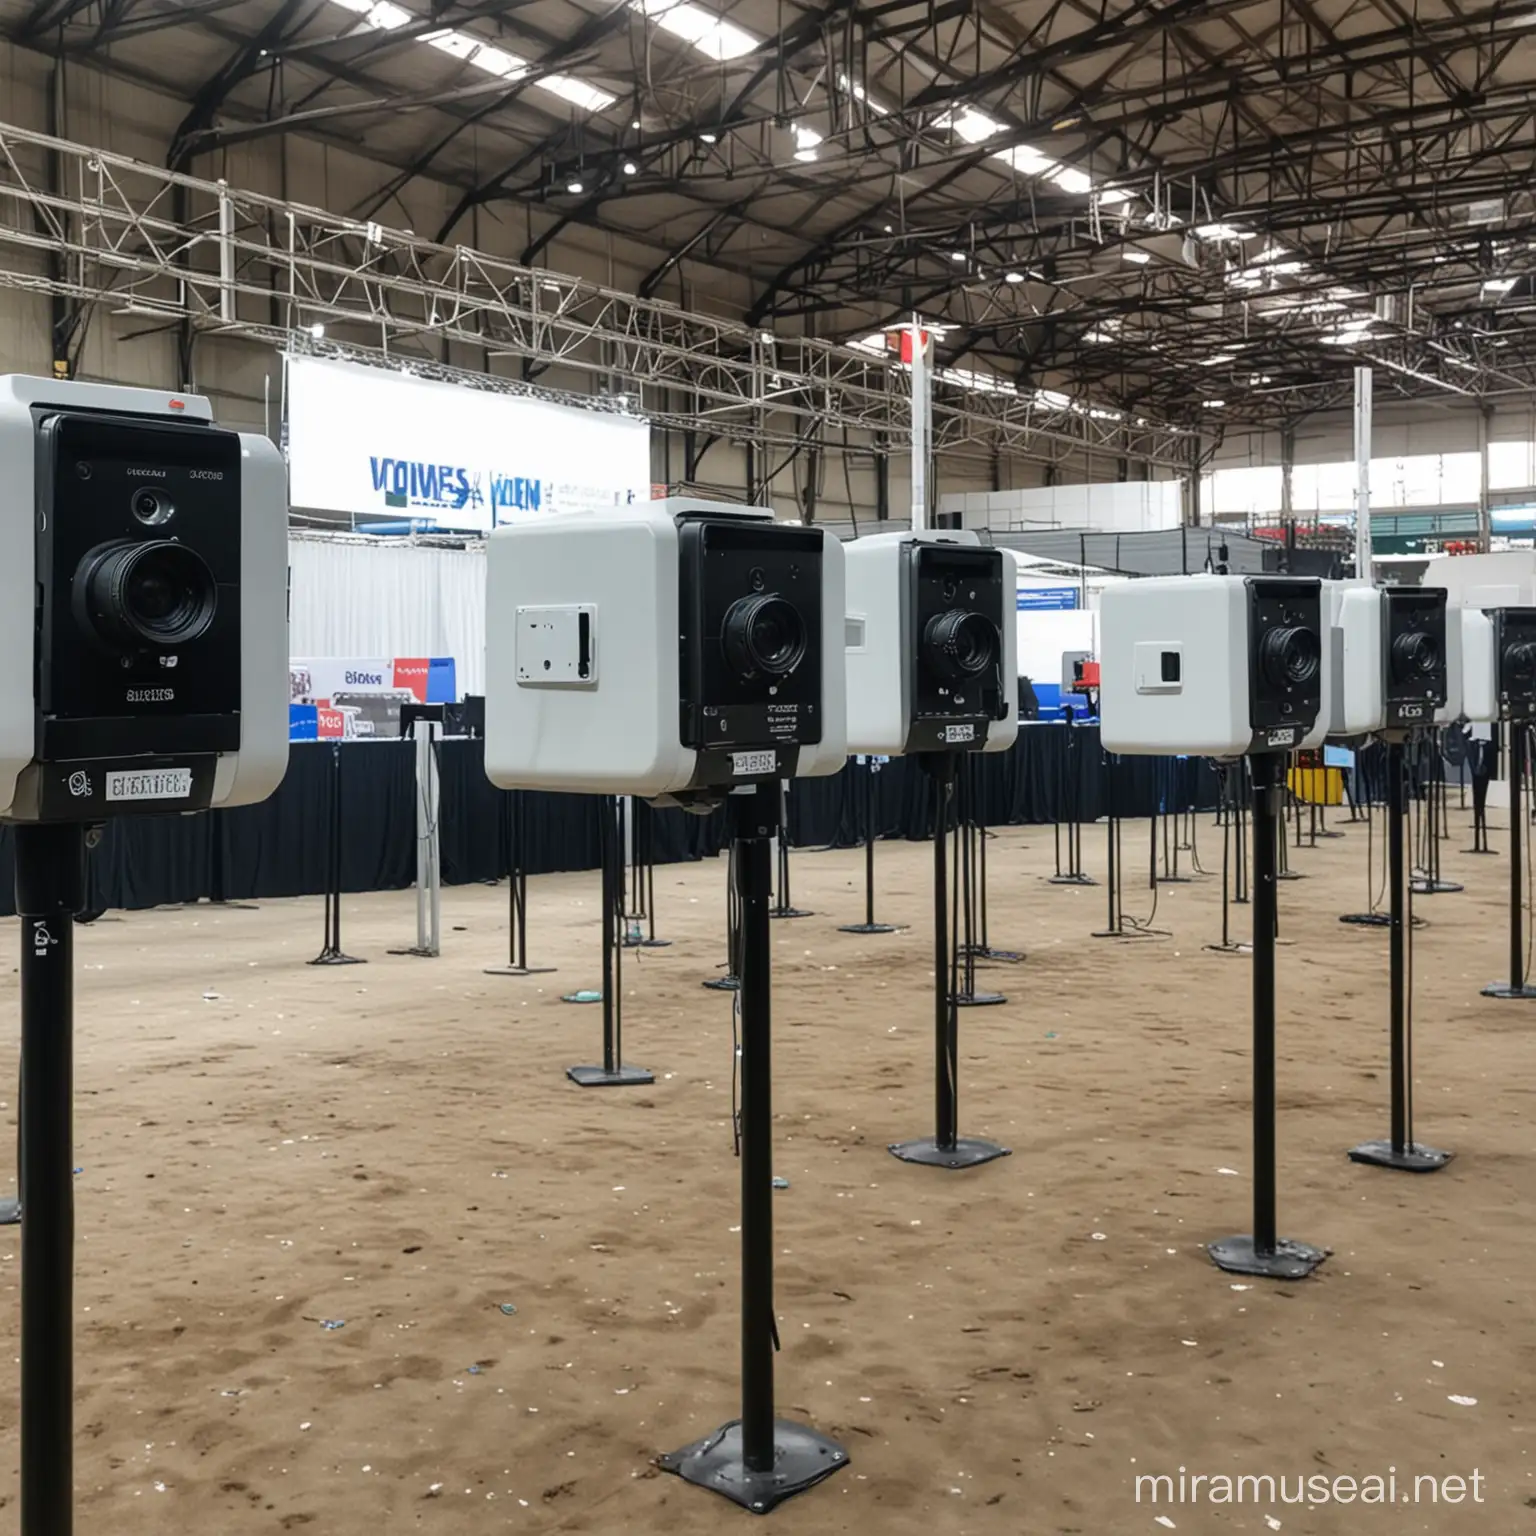 Live Broadcasting of Voting Booths with Wave Cameras